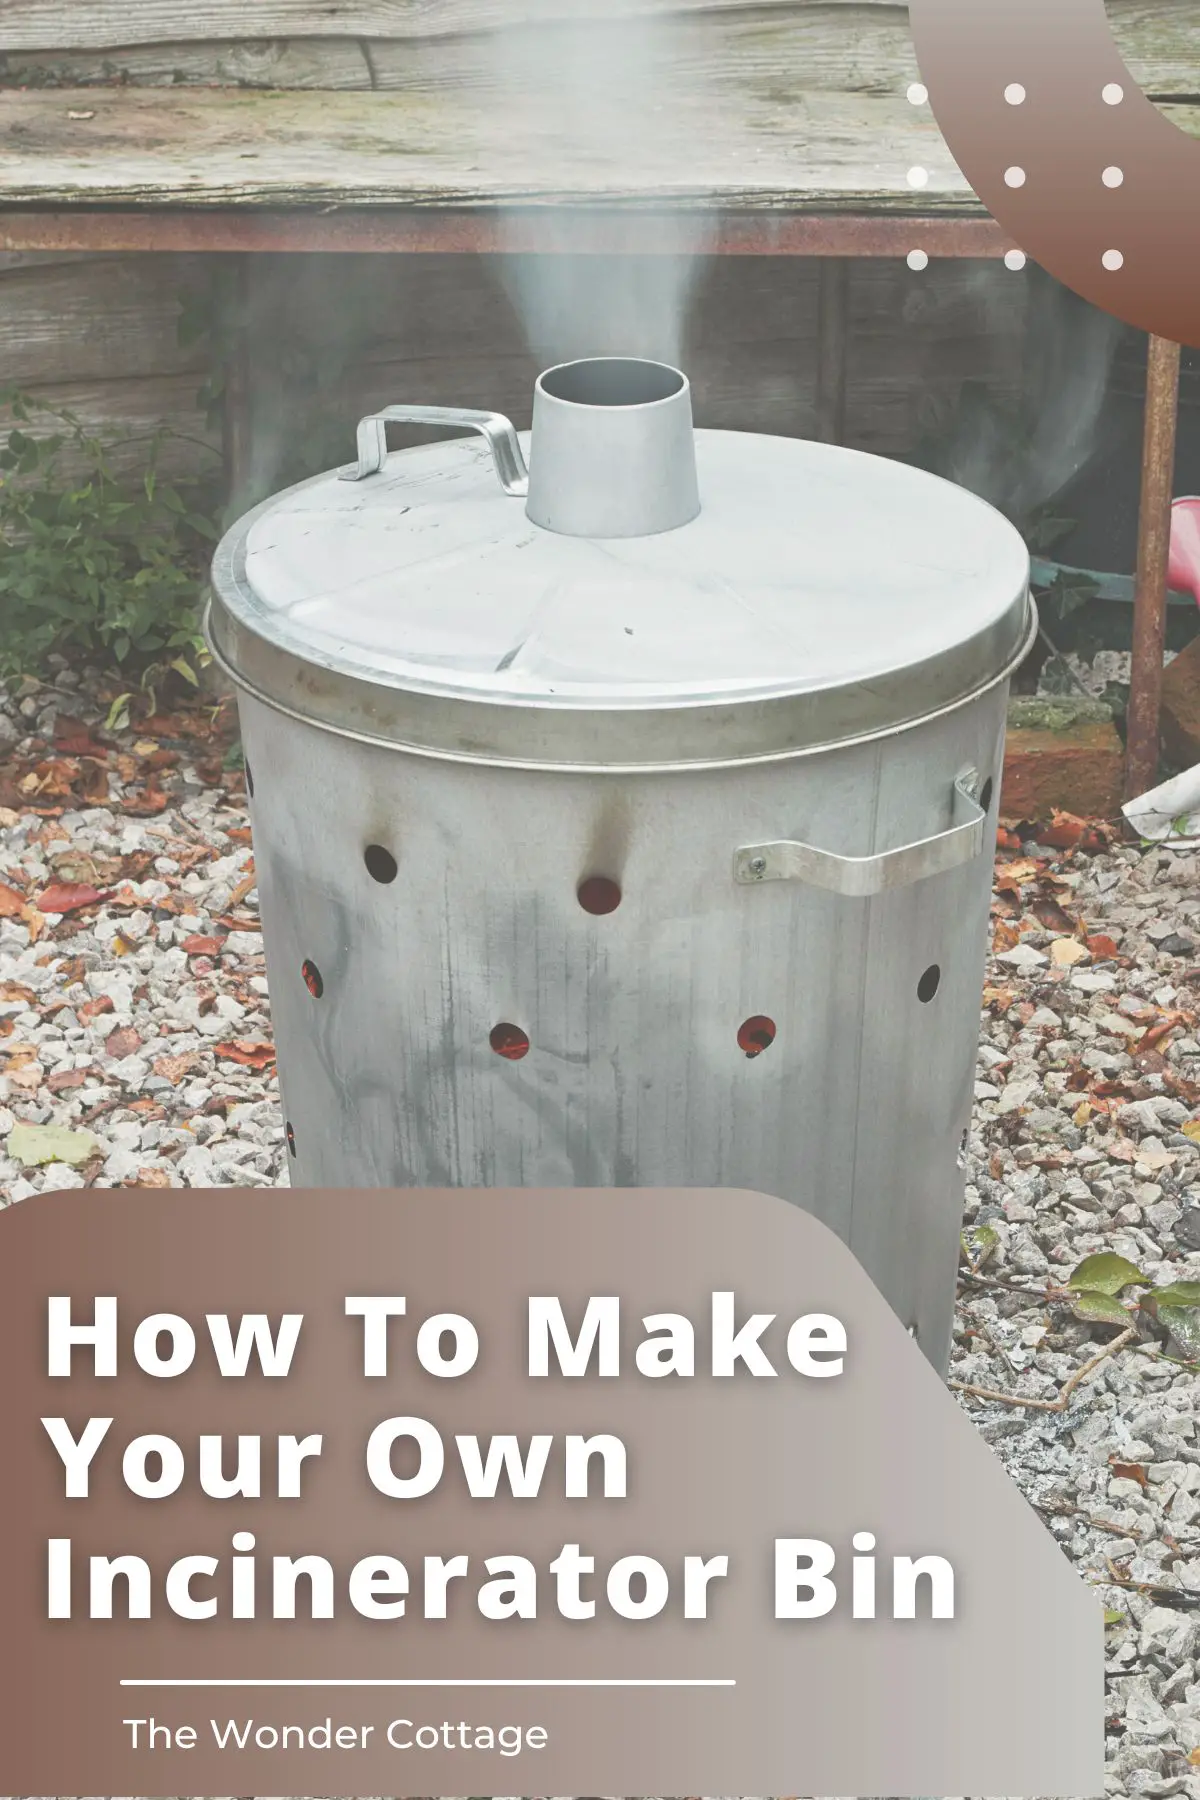 How To Make Your Own Incinerator Bin